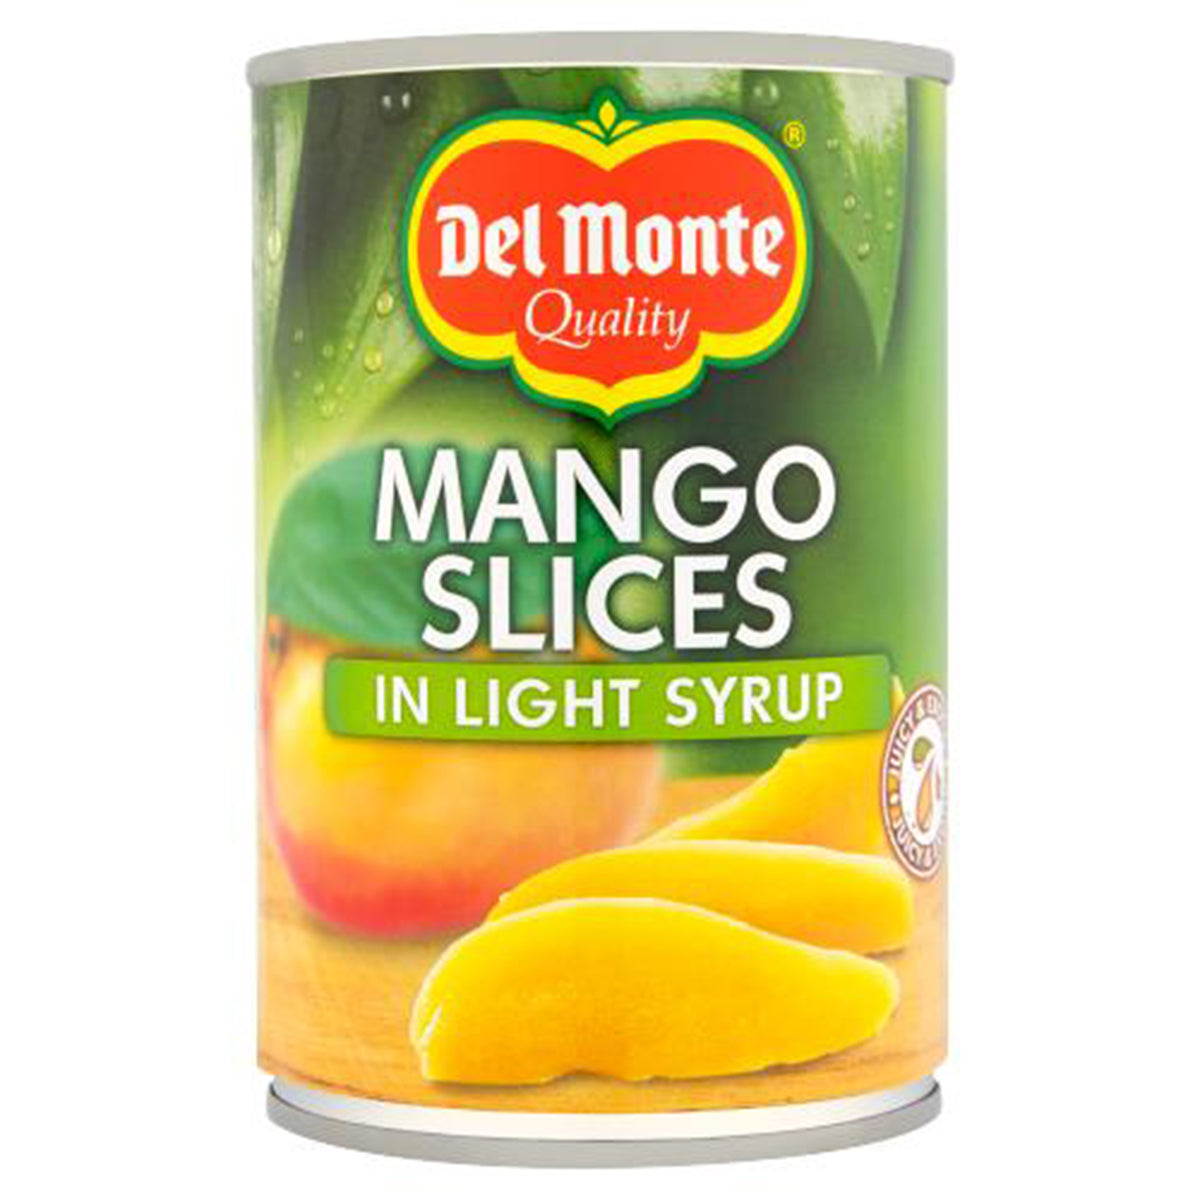 Del Monte - Mango Slices in Light Syrup - 425g - Continental Food Store